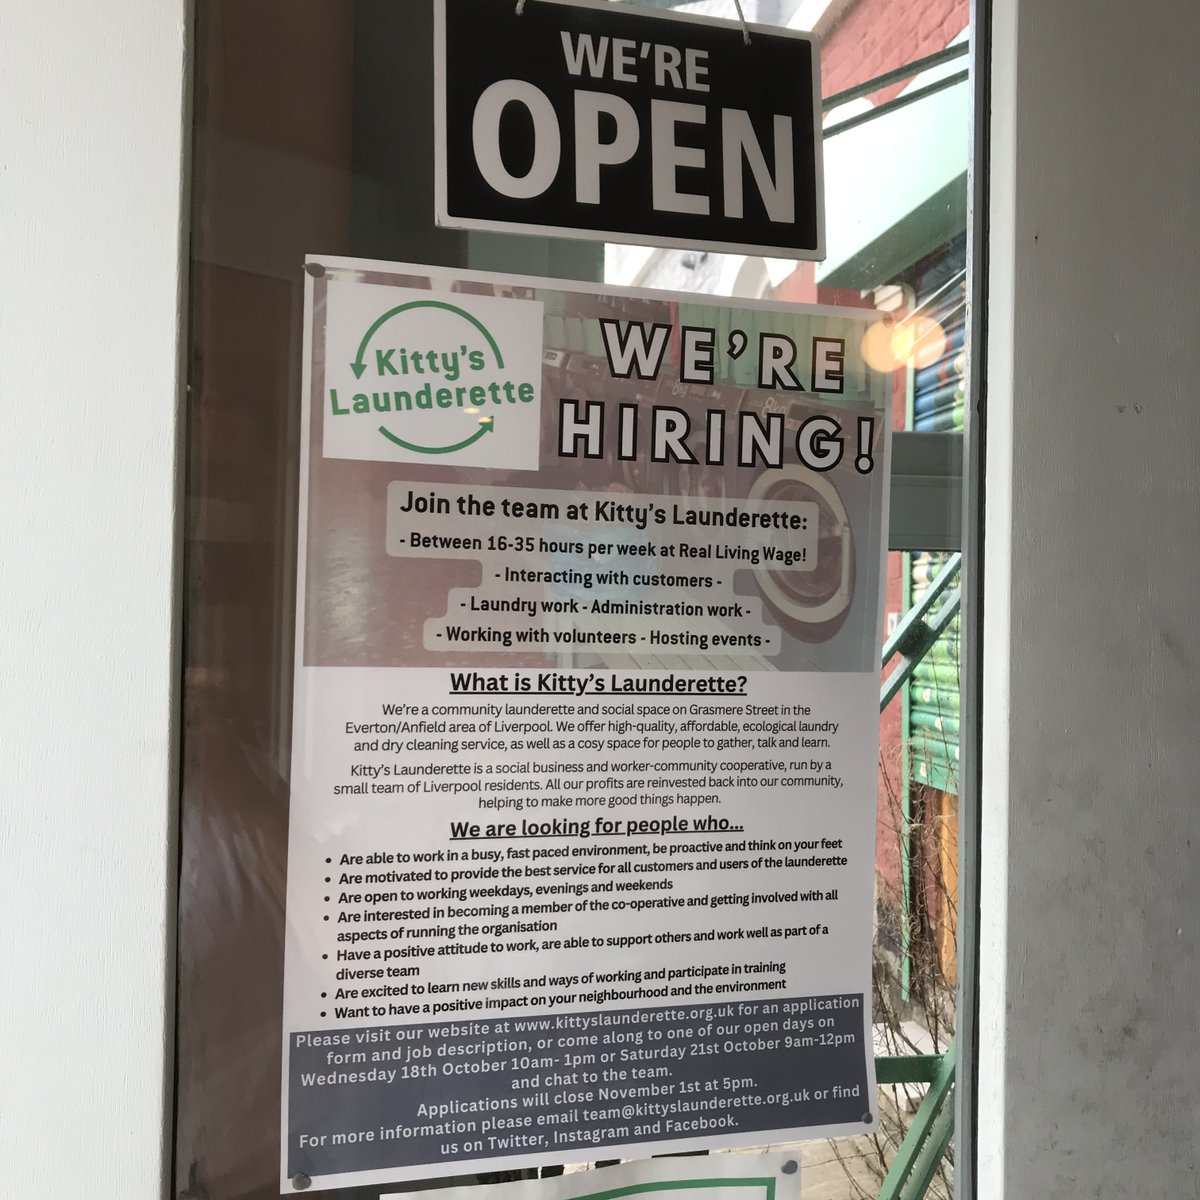 Tomorrow is our first open day for people interested to find out more about working at Kitty's Launderette! Pop down between: -10am-1pm on Wednesday 18th -9am-12pm on Saturday 21st October To chat to our friendly team and get a feel for the place 💚 tinyurl.com/4aajyskf